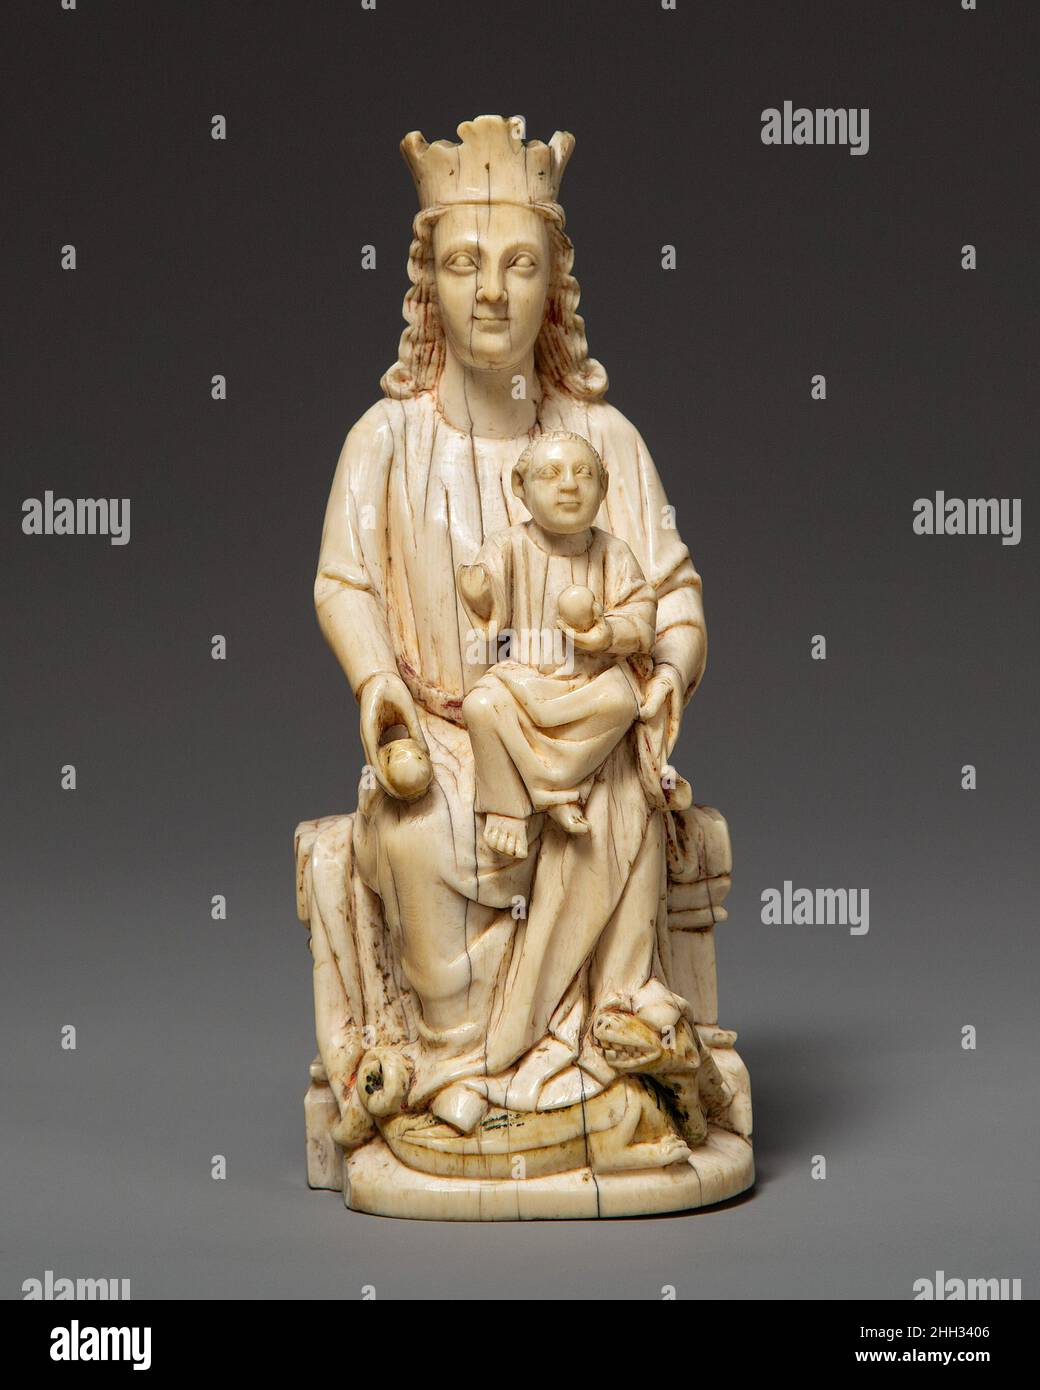 Enthroned Virgin and Child ca. 1200–1250 Spanish Although many ivory statues from medieval France survive, this enthroned Virgin and Child is a rare example from Spain. The wide open eyes, straight nose, rounded chin, and thick neck are typical of thirteenth- and fourteenth-century representations from the old kingdoms of Léon and Navarre. Both Virgin and Child are shown holding spherical objects (apples or orbs), symbols of authority that allude to Jesus as the new Adam and Mary as the new Eve. The Virgin is victorious; the devil in the form of a dragon lies vanquished under her feet.. Enthro Stock Photo